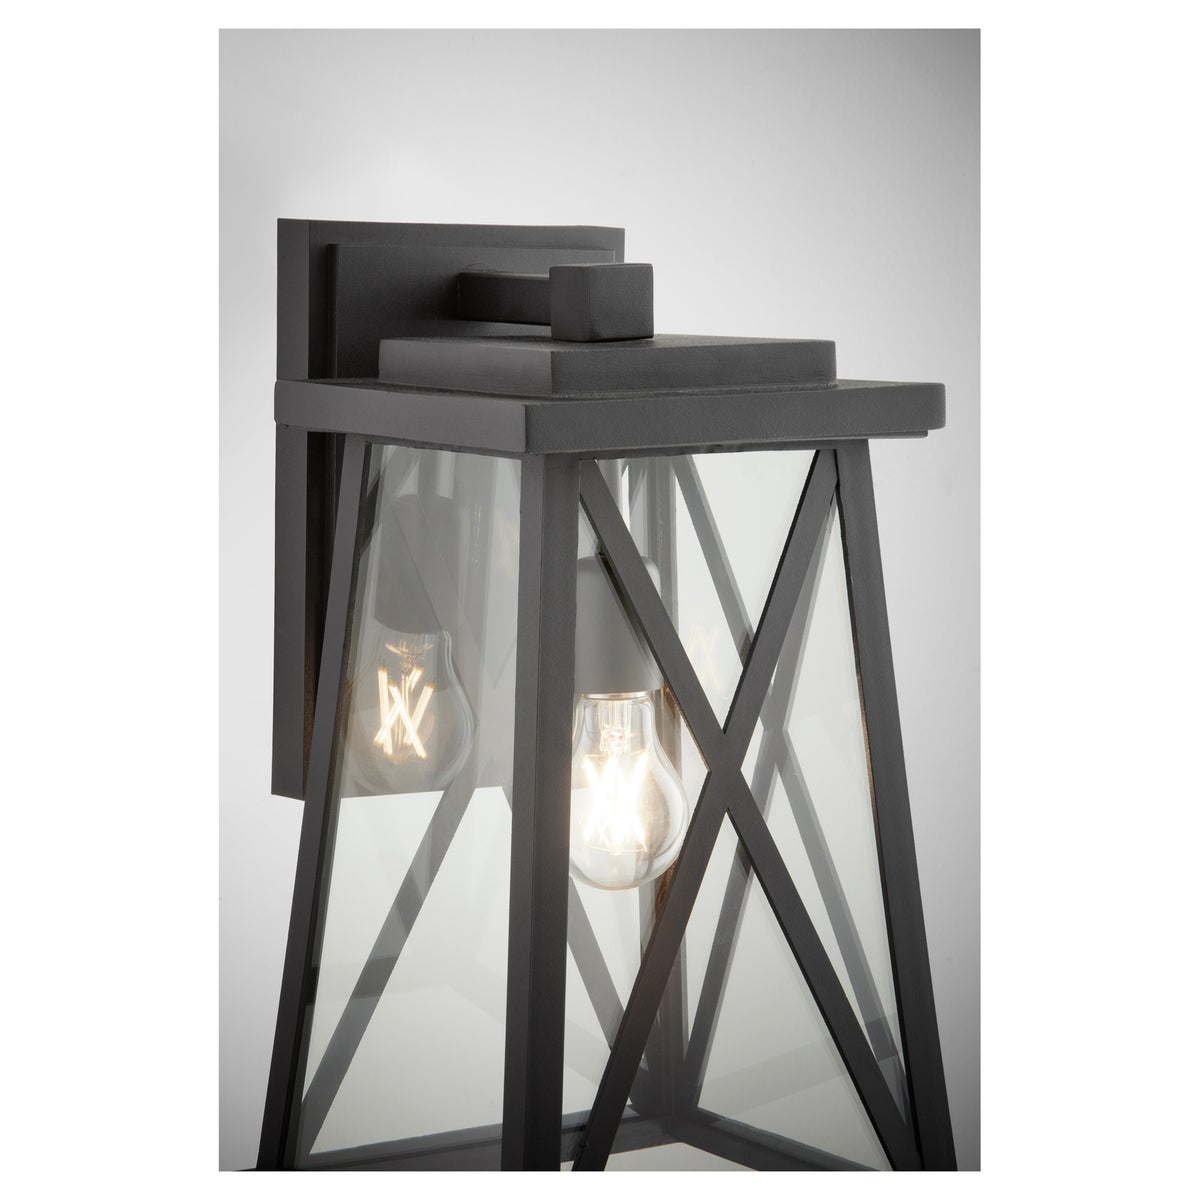 Black Outdoor Wall Light with X-brace design and warm glow cascading from the fixture. UL Listed for wet locations. 100W, 1 bulb, medium E26 base. 9.25"W x 16.25"H x 9.75"E. 2-year warranty.